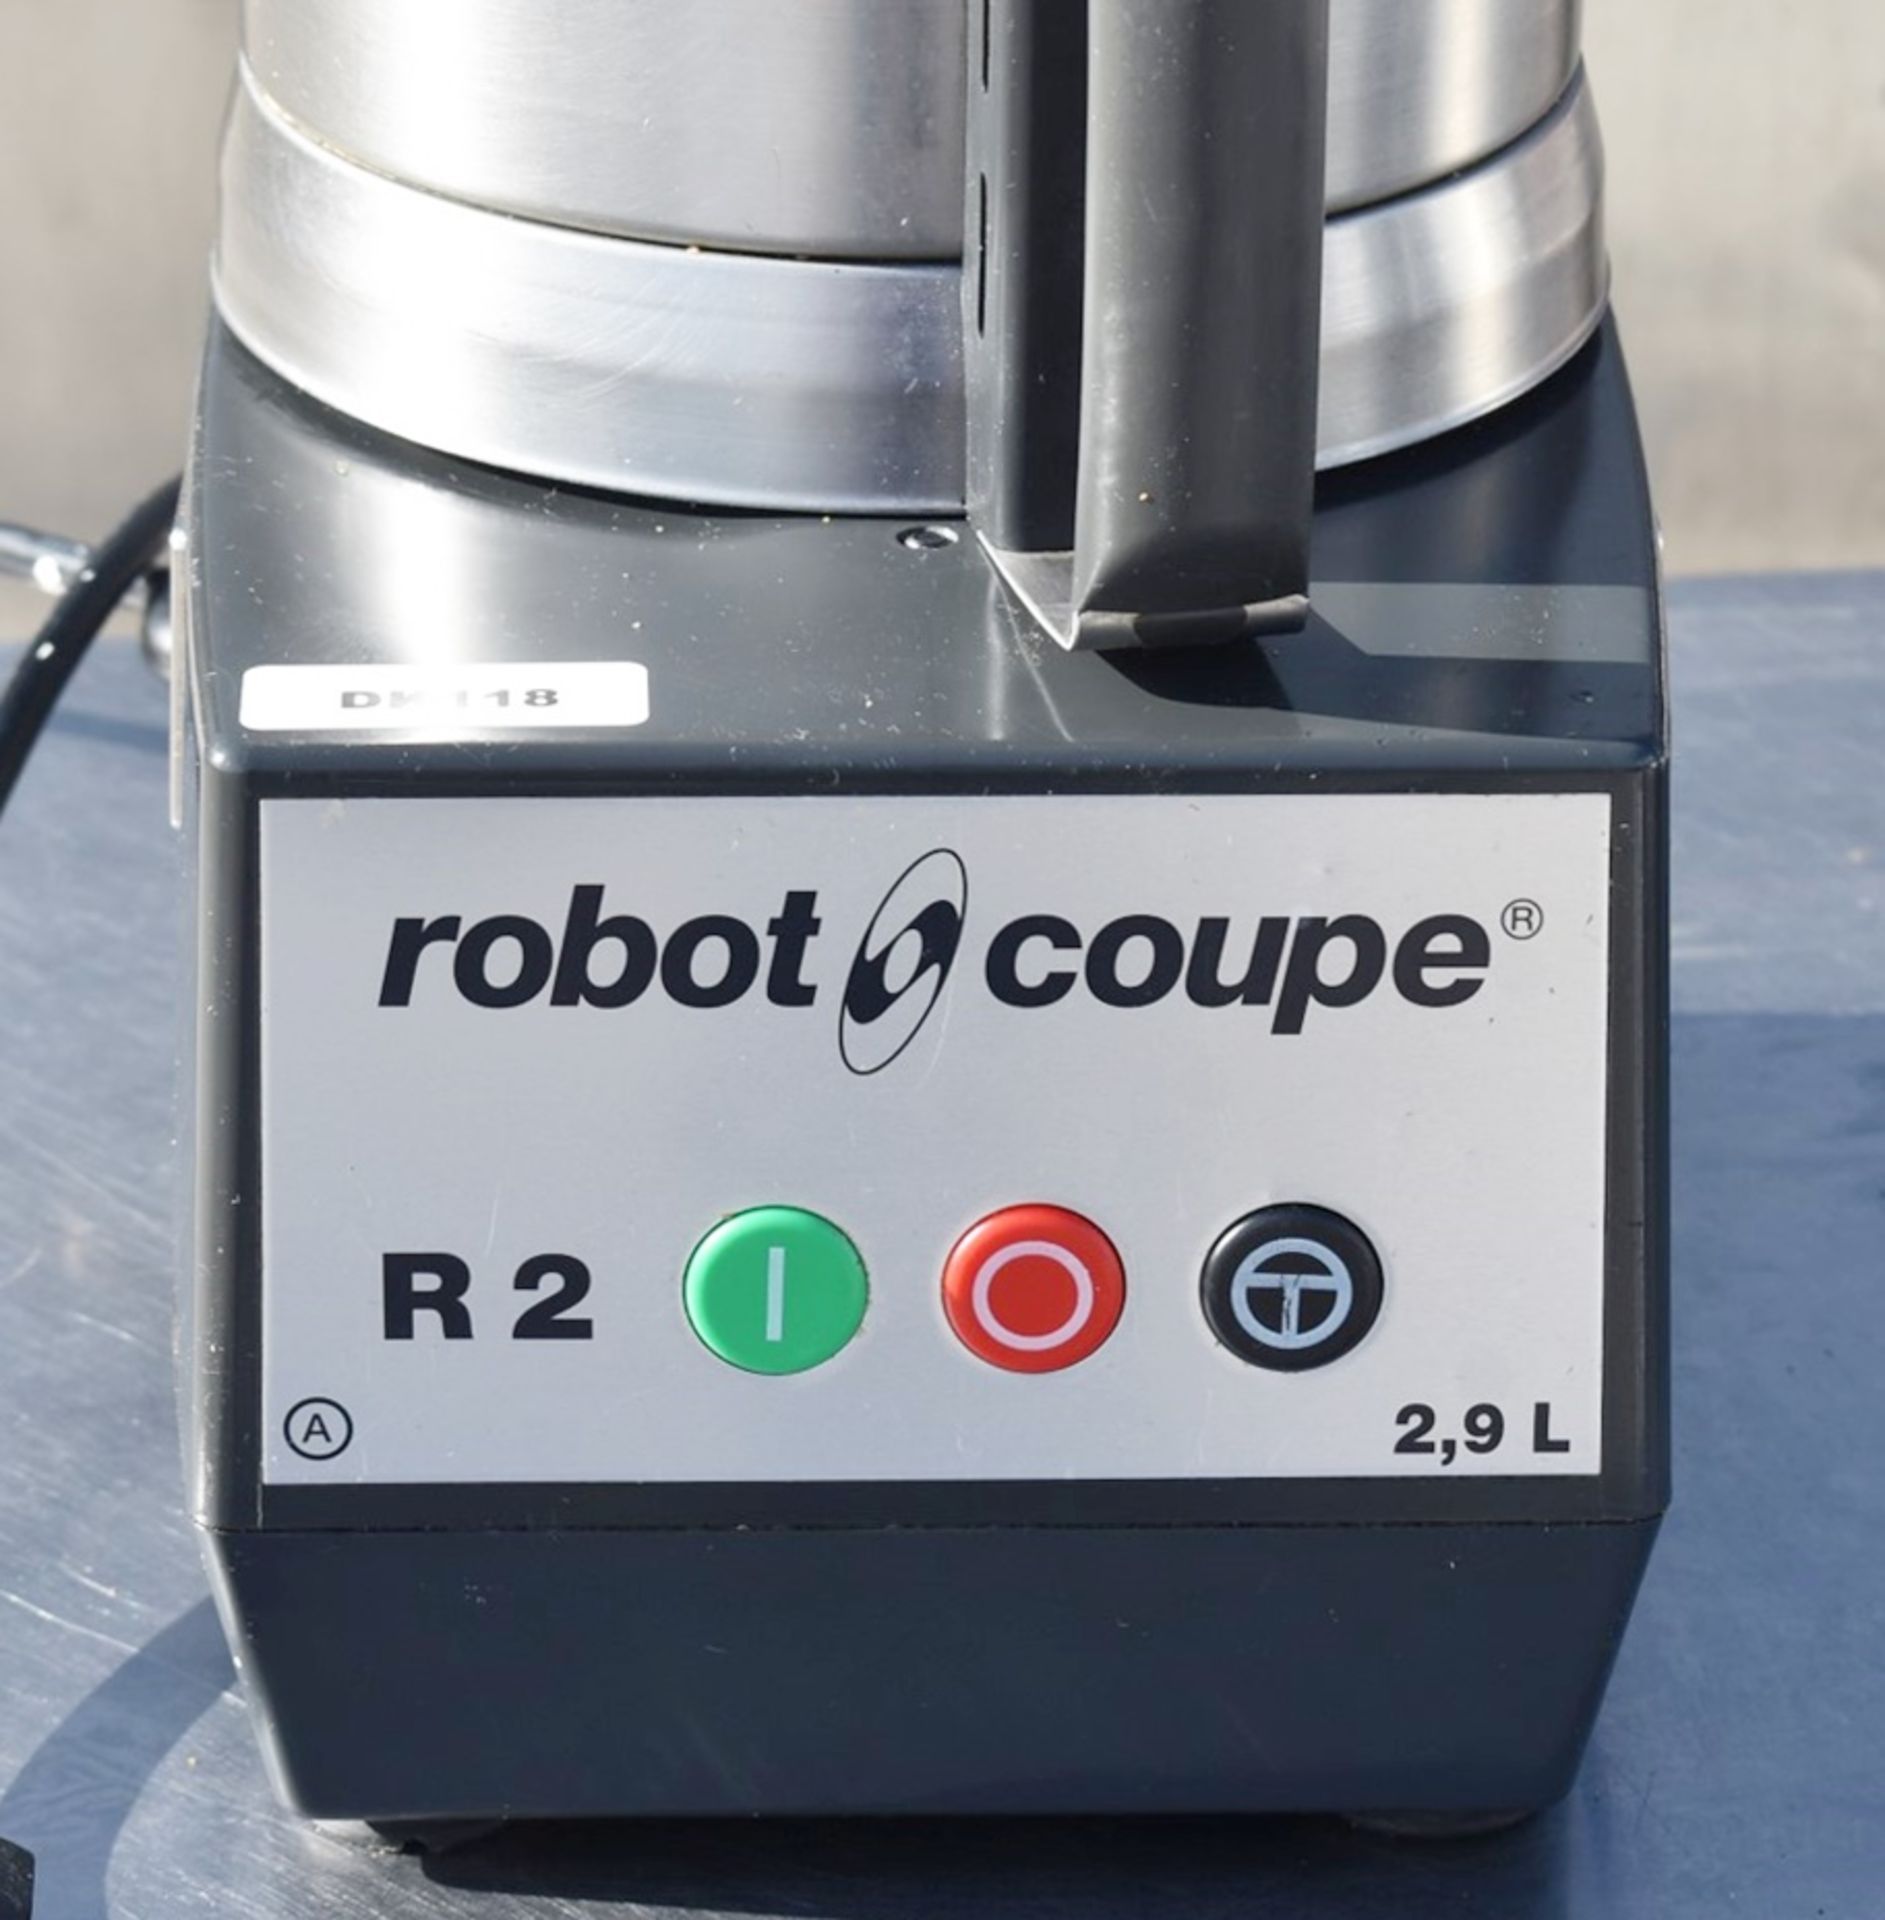 1 x Robot Coupe R2 Heavy Duty Cutter Blender - Recently Removed From a Dark Kitchen Environment - Image 2 of 9